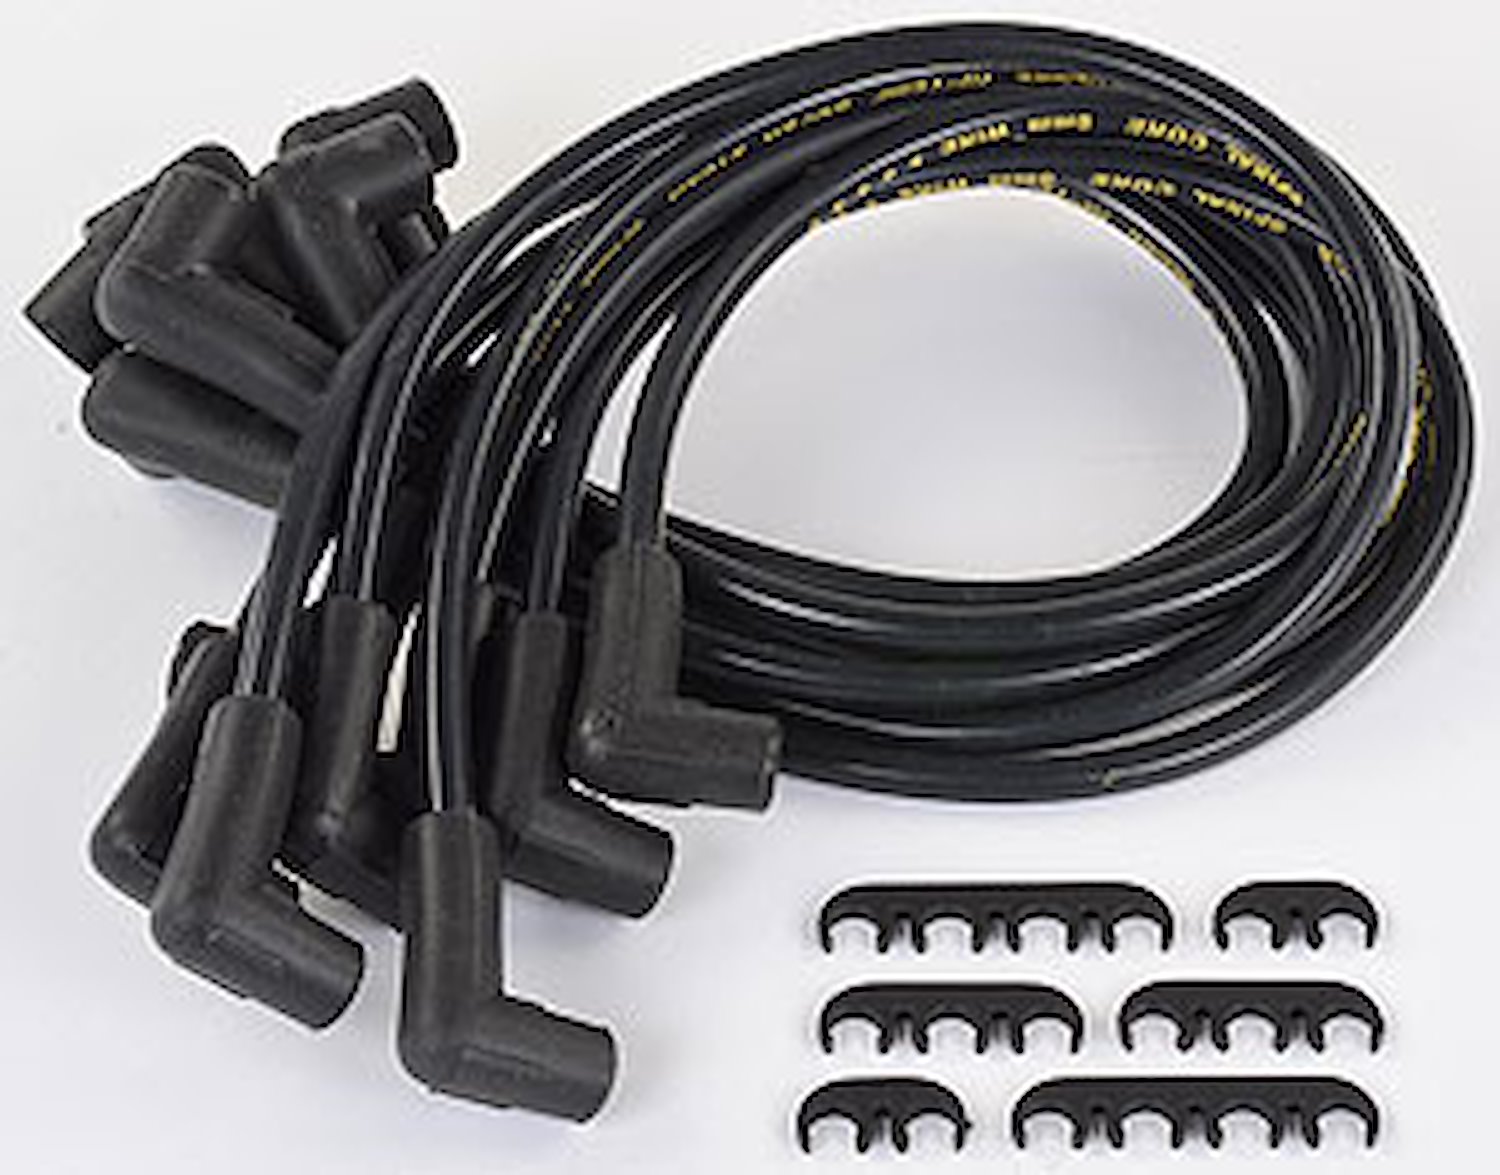 8mm SuperStock Spiral Wire Set Fits most 1974-90 GM HEI-Equipped V8